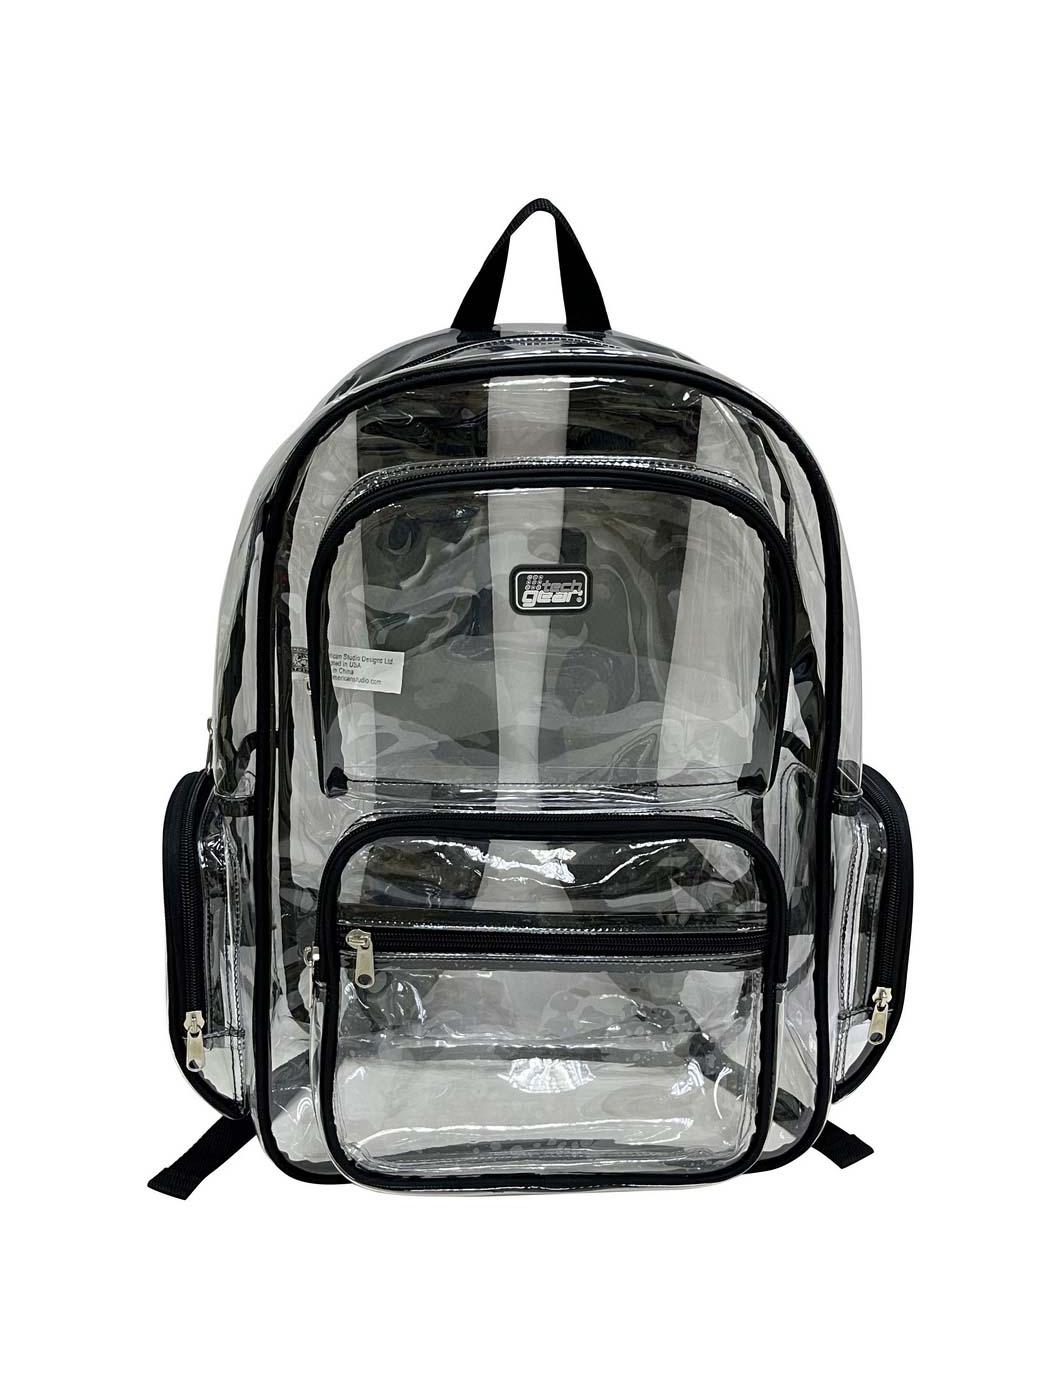 Tech Gear Clear Backpack with Trim - Black; image 1 of 3